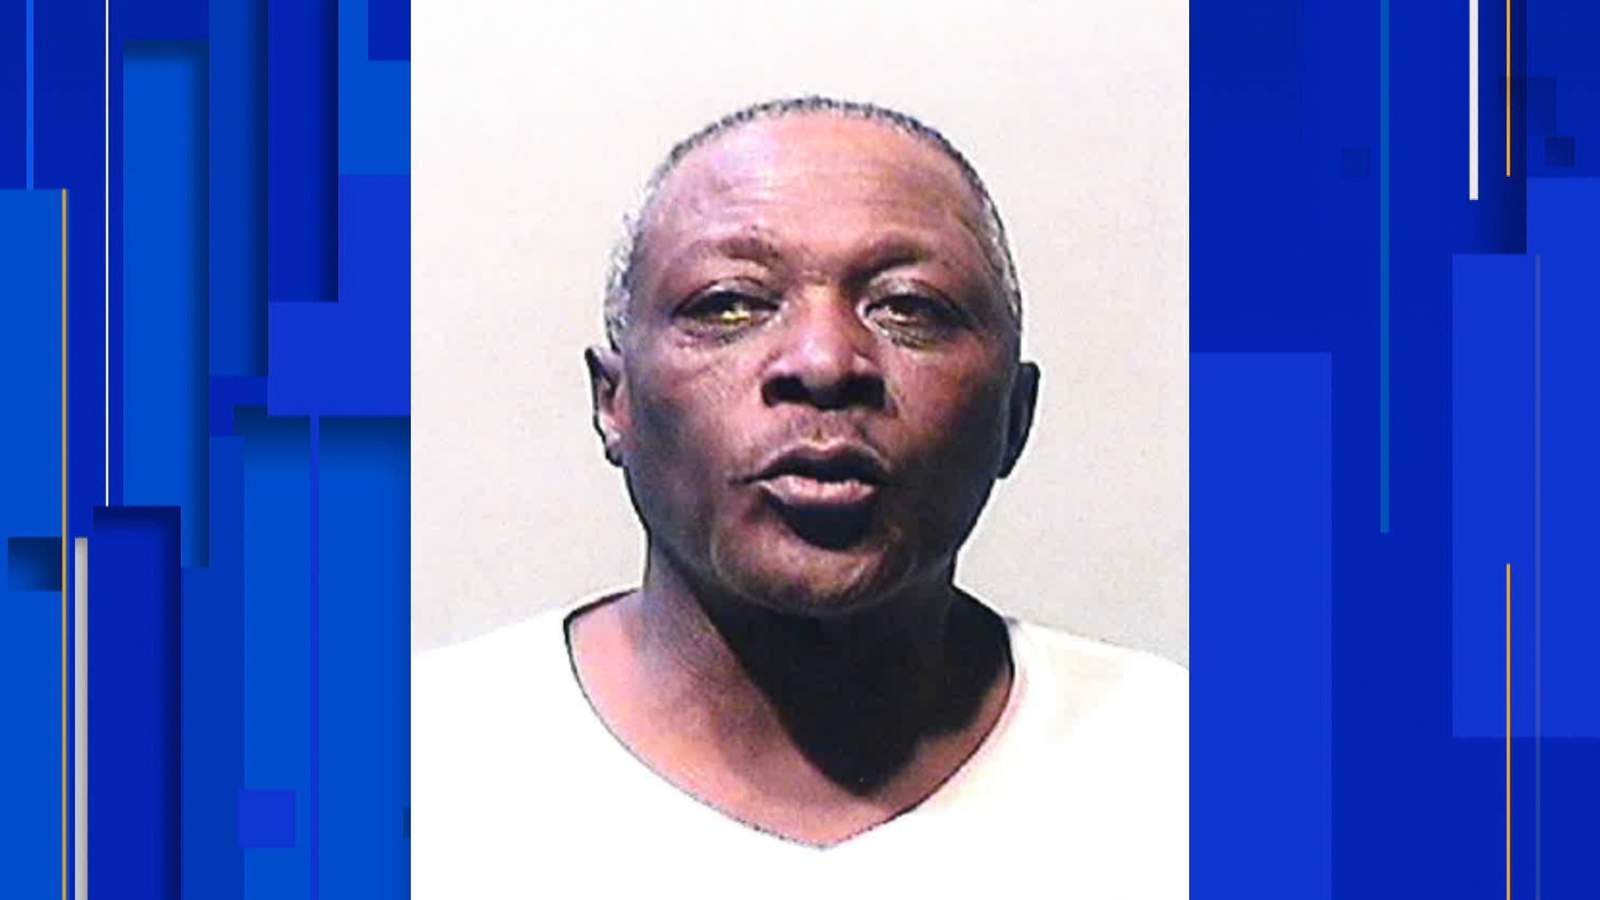 Friend concerned for safety of 61-year-old man last heard from in November, Detroit police say